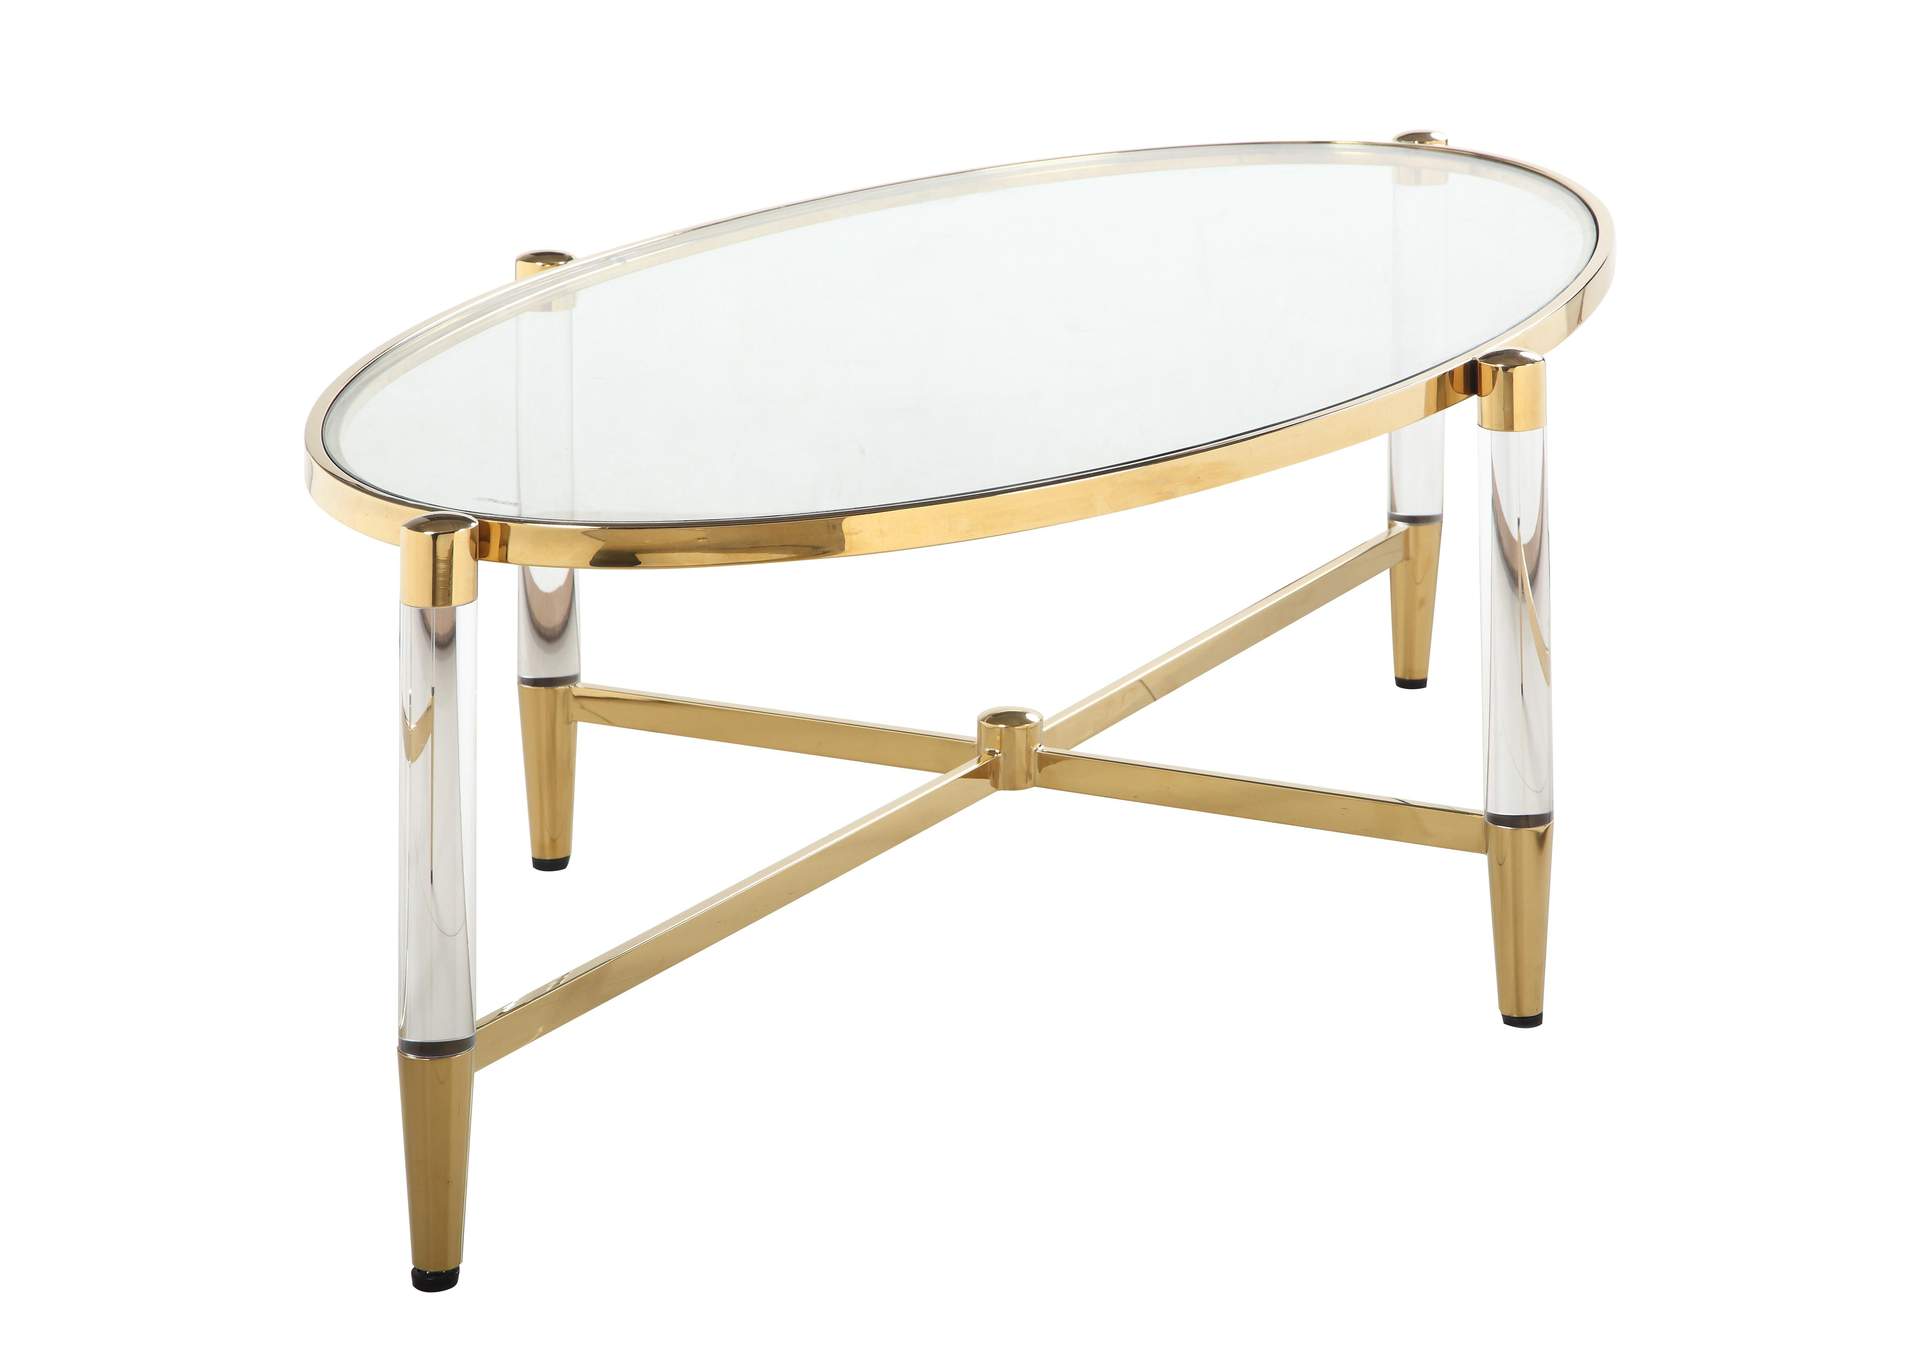 Denali Brass Oval Tempered Glass Cocktail Table,Chintaly Imports